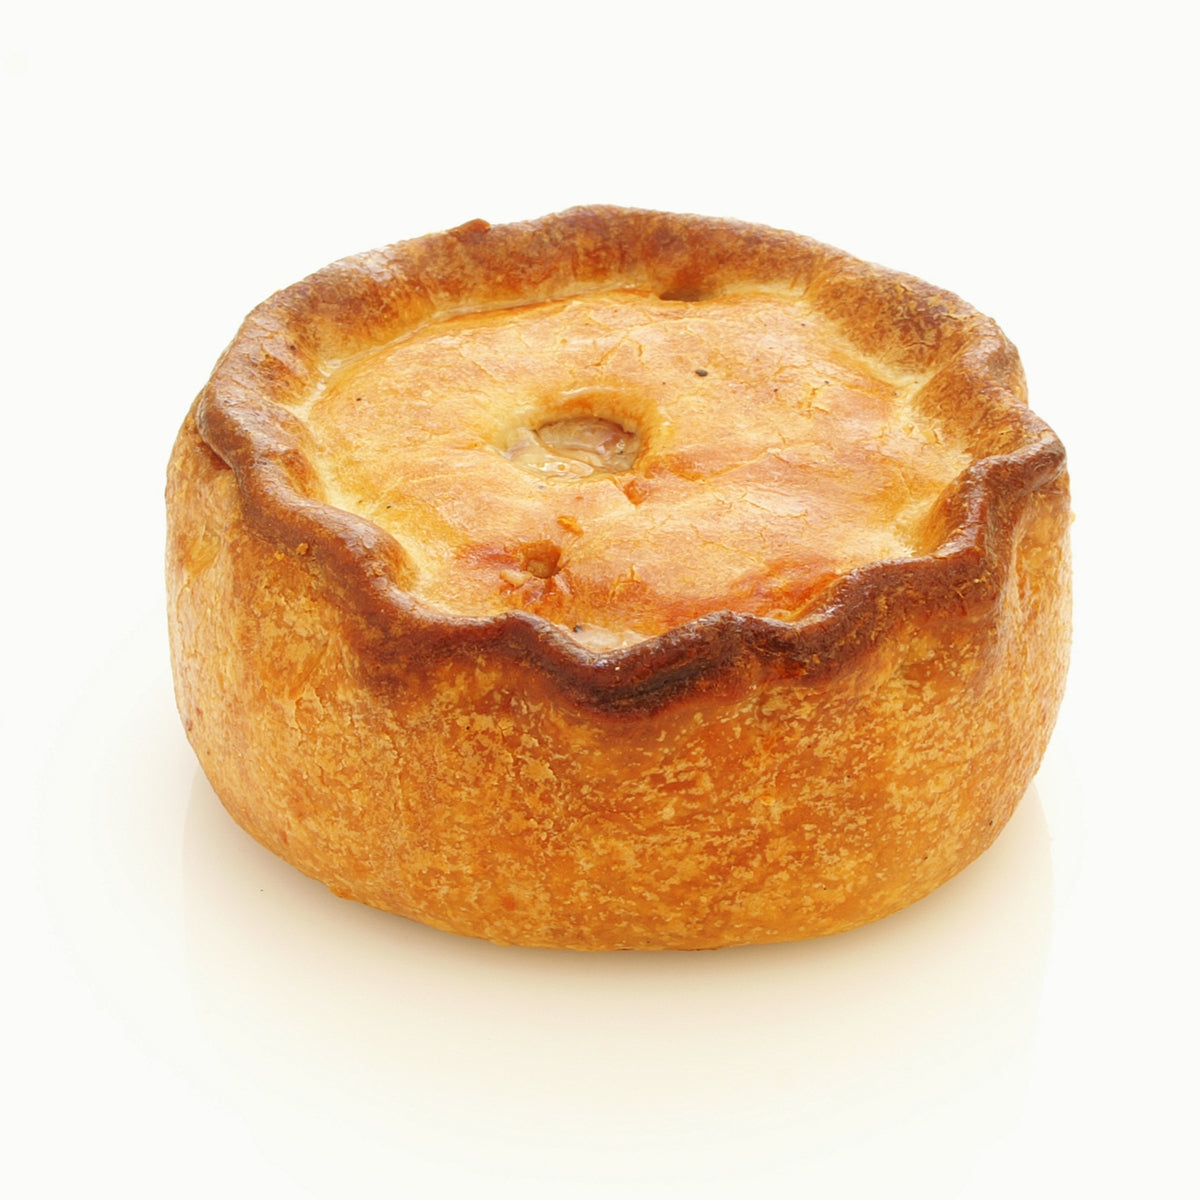 Simply Good Pies Mala Cheese Pie, Best Pies in Singapore, Mala Cheese Pie, Pies Delivery Singapore, Best Cheese Pie, Best Mala Pie Sg, Home Delivery Singapore, Best Handmade Pies Sg